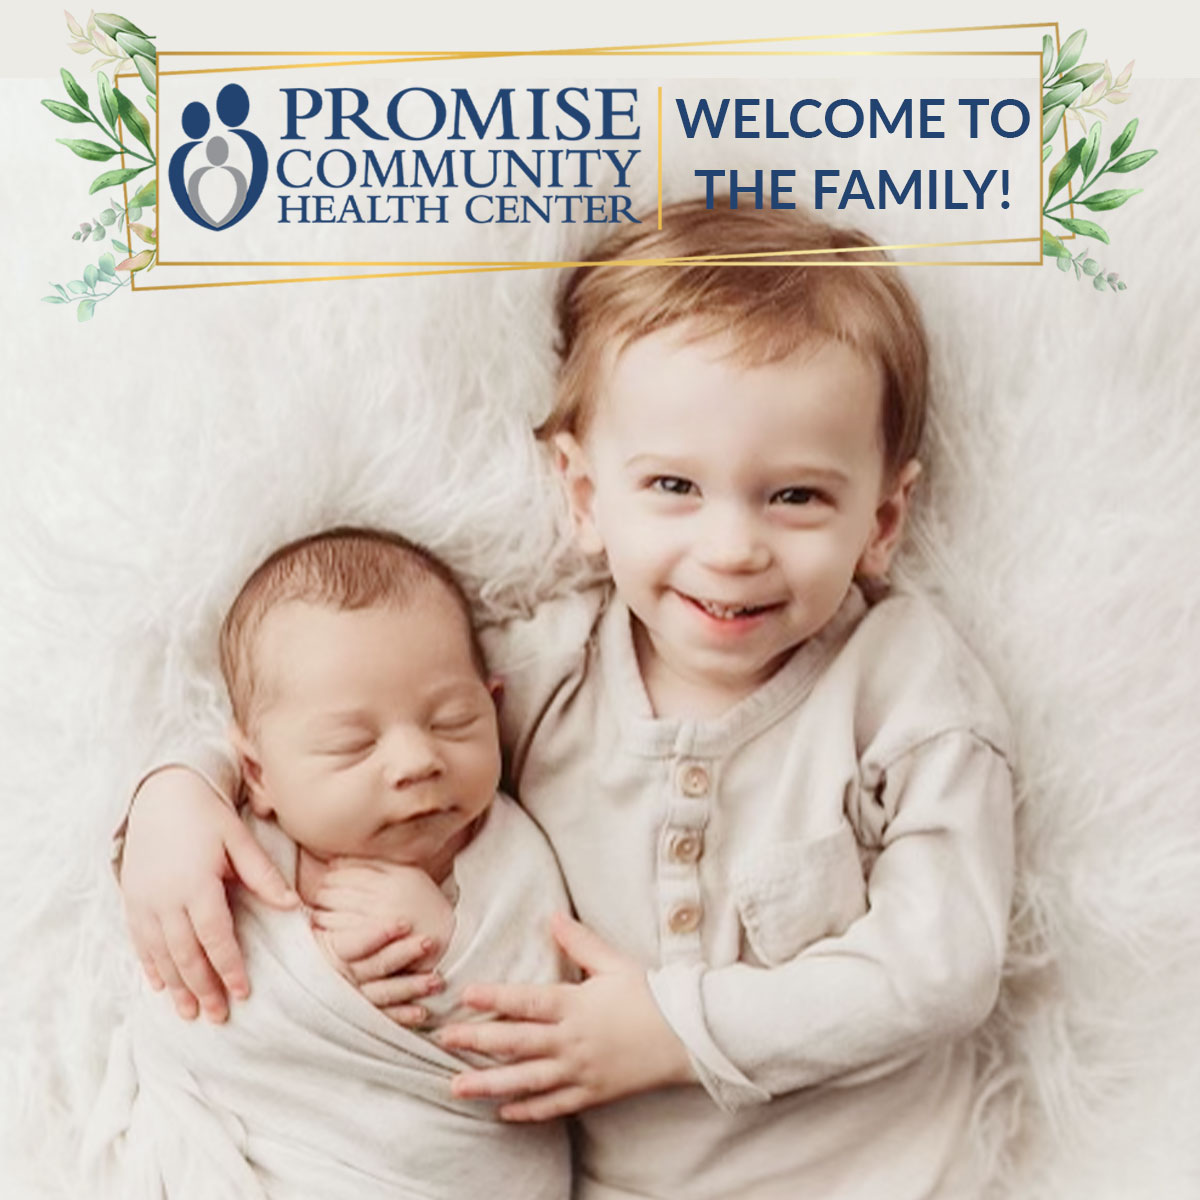 Koupal Family | Promise Community Health Center in Sioux Center, Iowa | Home births in northwest Iowa, Home births in southeast South Dakota, Home births in southwest Minnesota | Home births in Sioux Falls South Dakota, Home births in Beresford South Dakota, Home births in Sioux City IA, Home births in LeMars IA, Home births in Worthington MN, Home births in Iowa, Home births in South Dakota, Home births in Minnesota